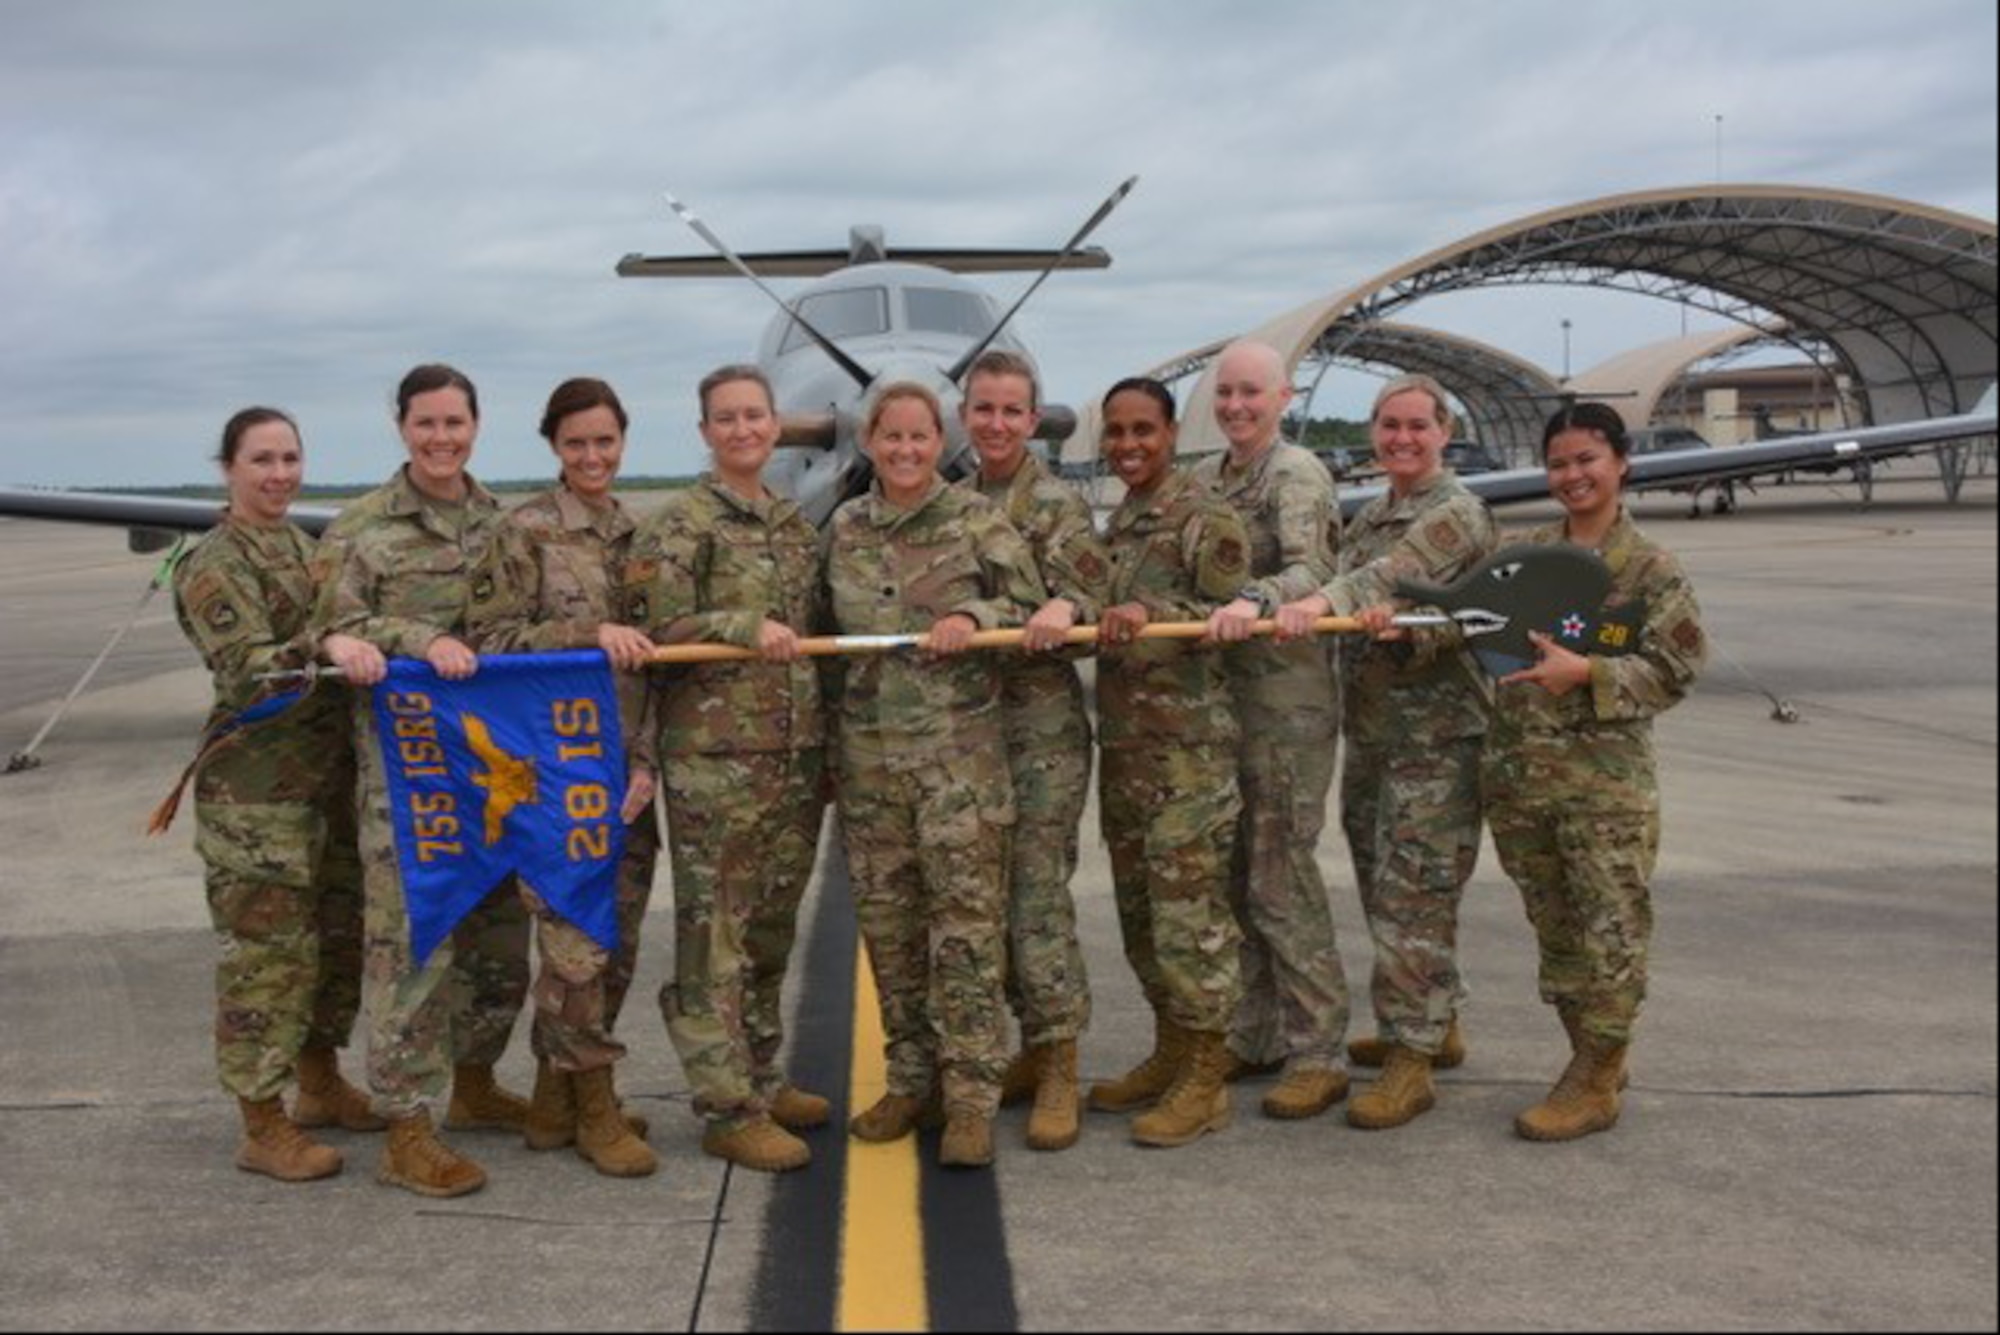 The 655th Intelligence, Surveillance and Reconnaissance Wing’s 28th Intelligence Squadron based at Hurlburt Field, Florida, is making history for the wing as it is led entirely by women. Under the command of Lt. Col. Elisabeth Applegate, the 28th IS is home to more than 70 Reserve Barracudas, specializing in providing airborne intelligence, surveillance and reconnaissance operators to special operations forces worldwide.